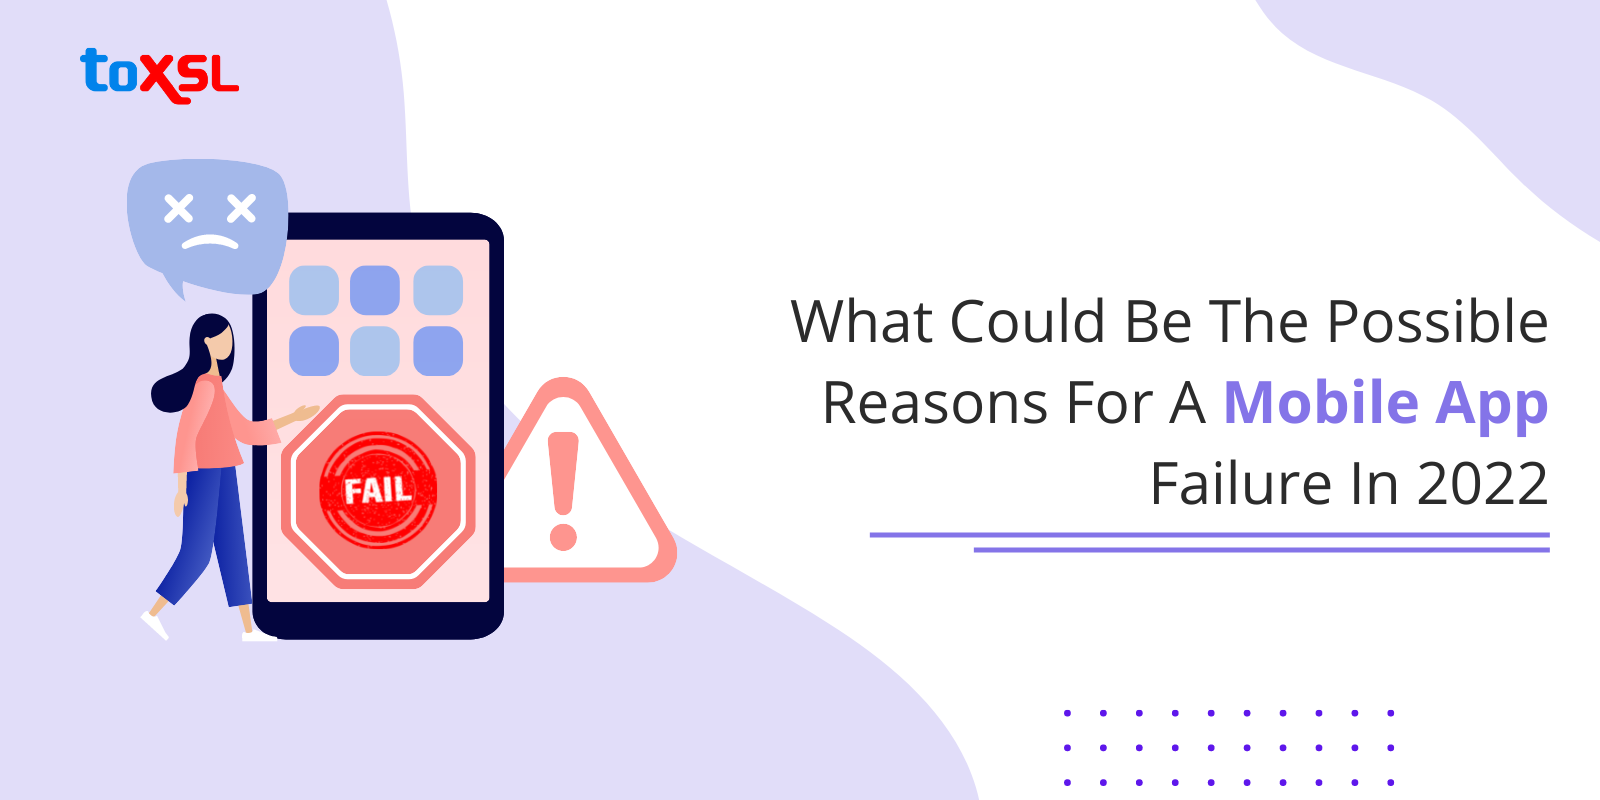 What Could Be The Possible Reasons For A Mobile App Failure In 2022?